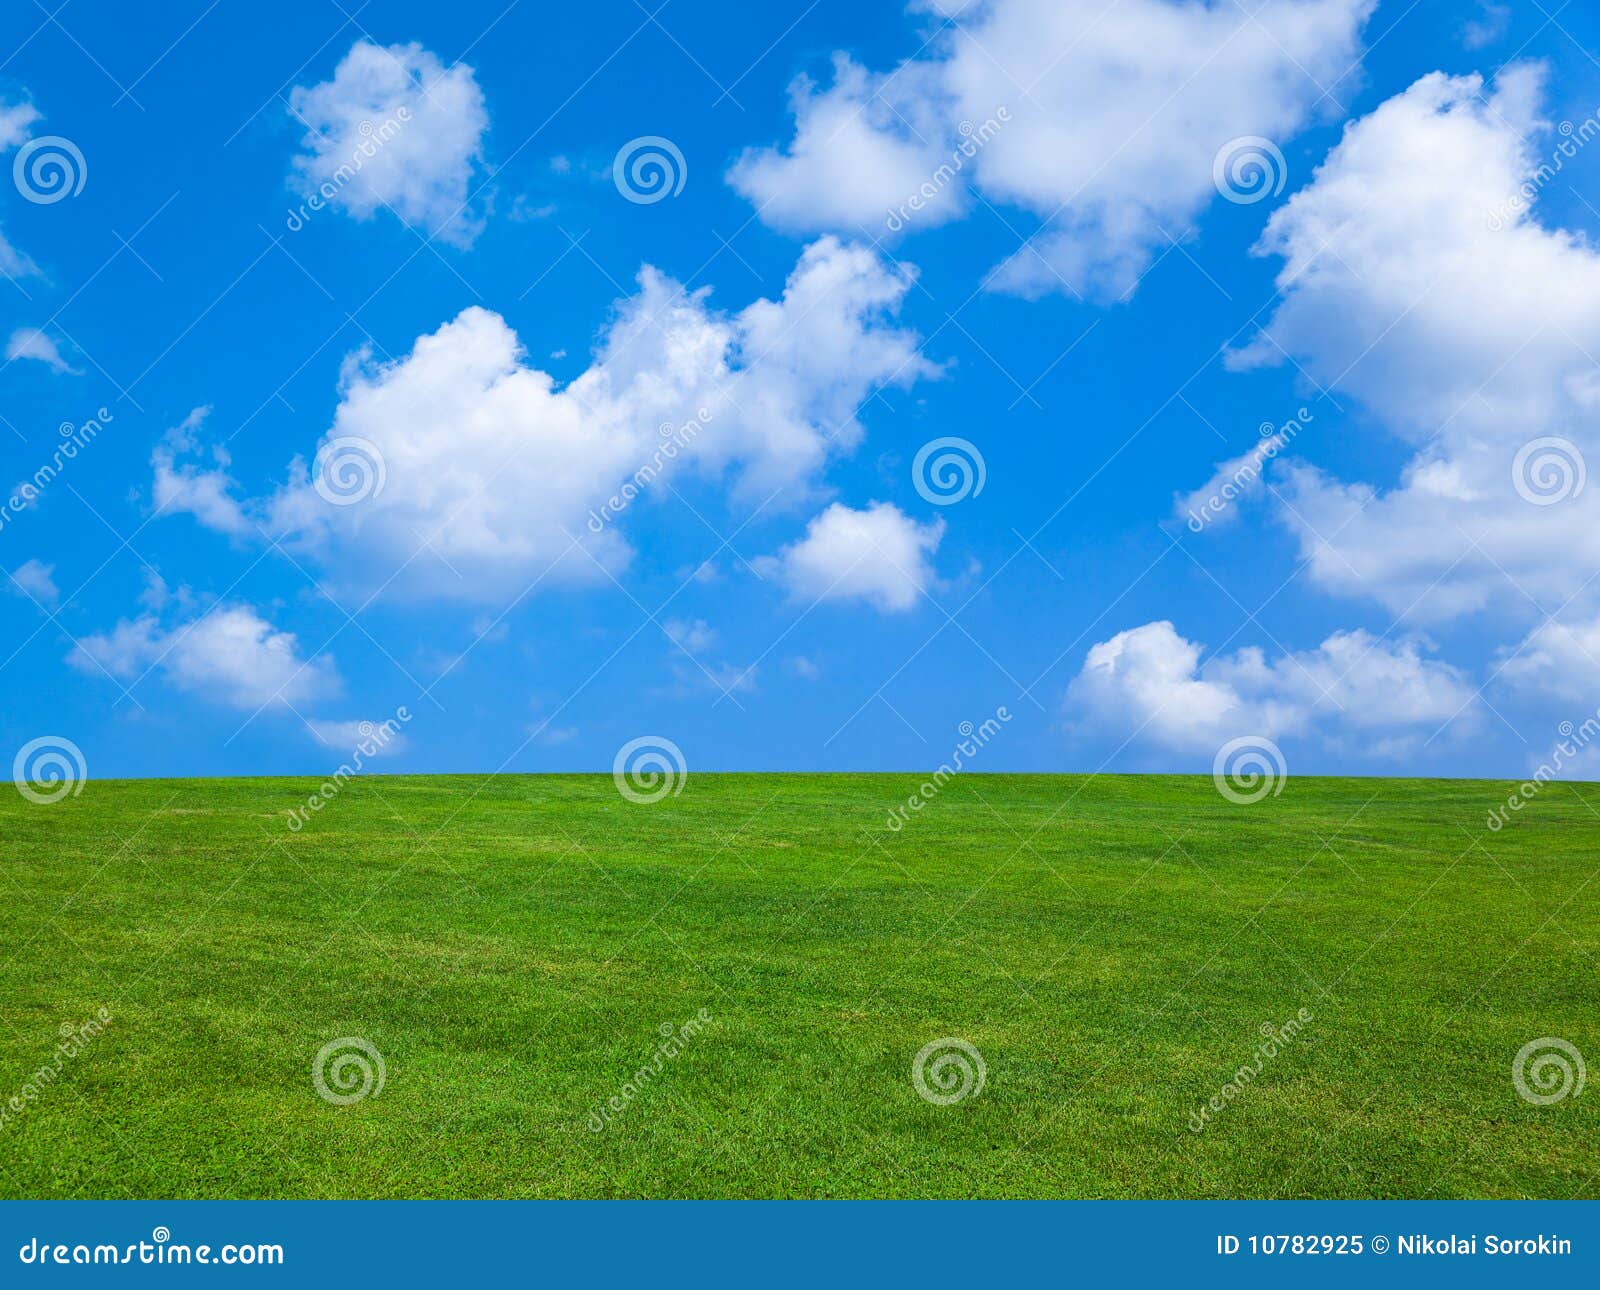 grass and cloudy sky